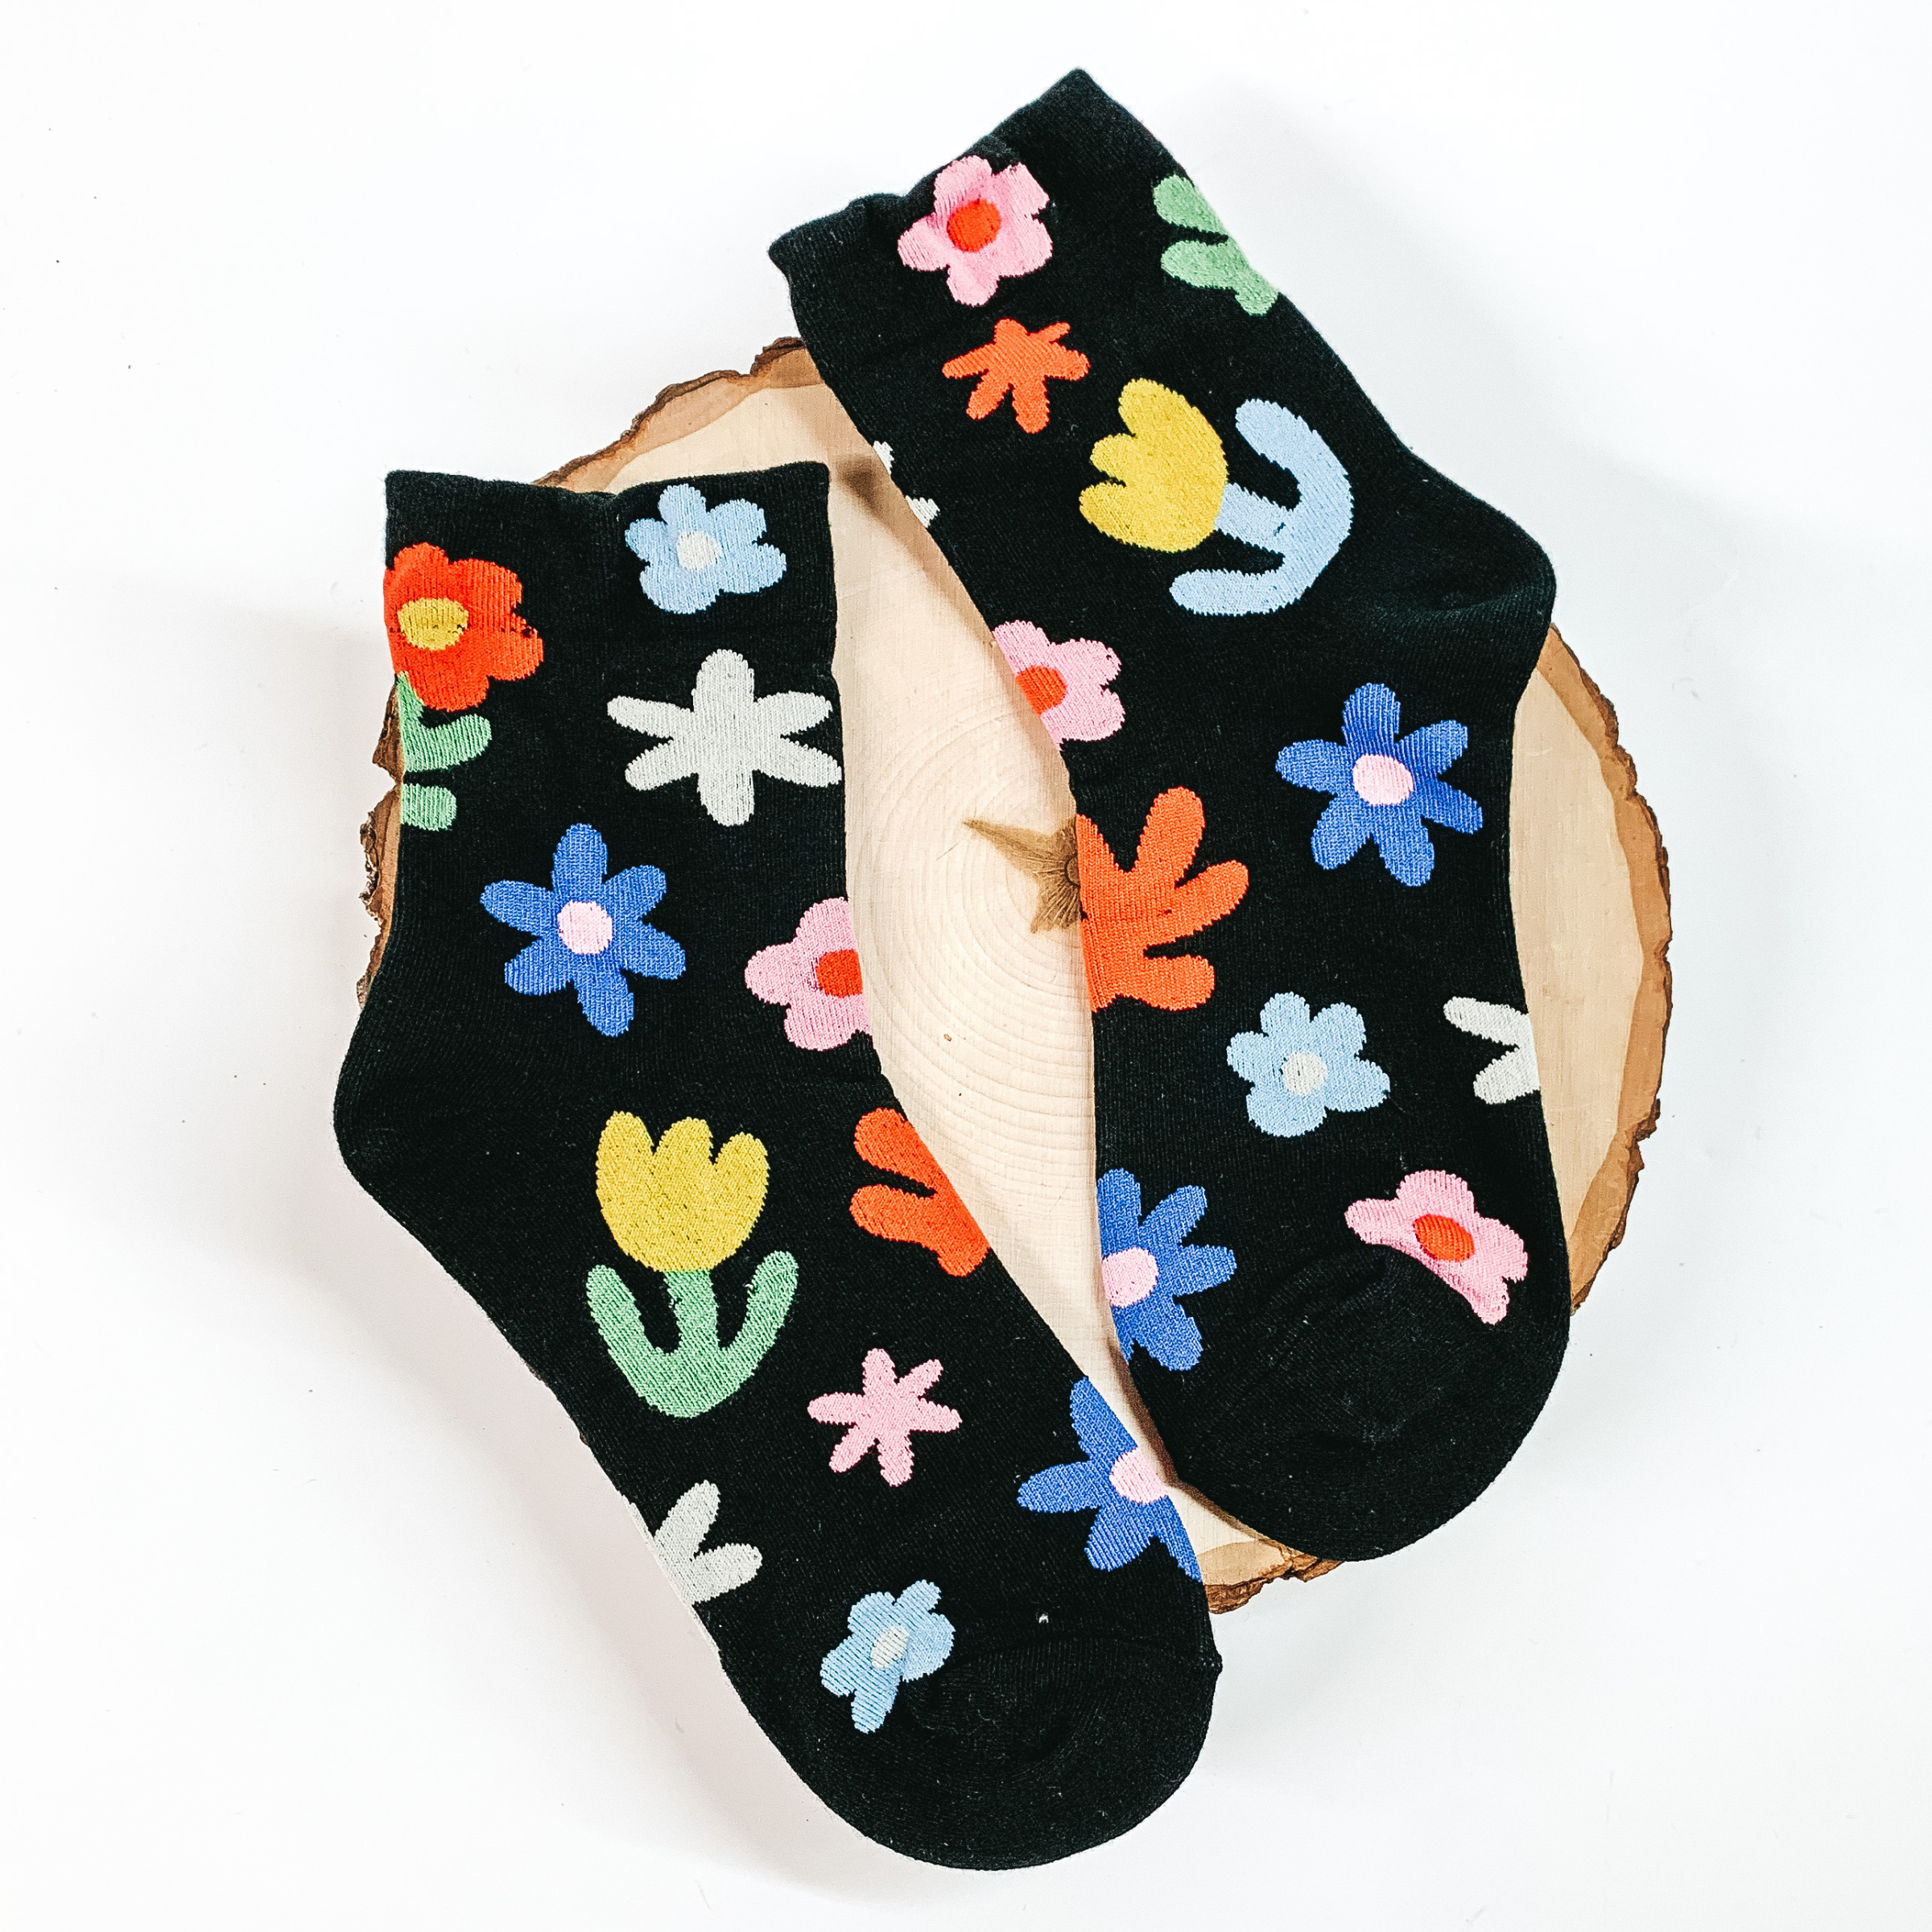 Black ankle socks that have a groovy flower design. The flower design is multicolored. These socks are pictured on a piece of wood on a white background. 